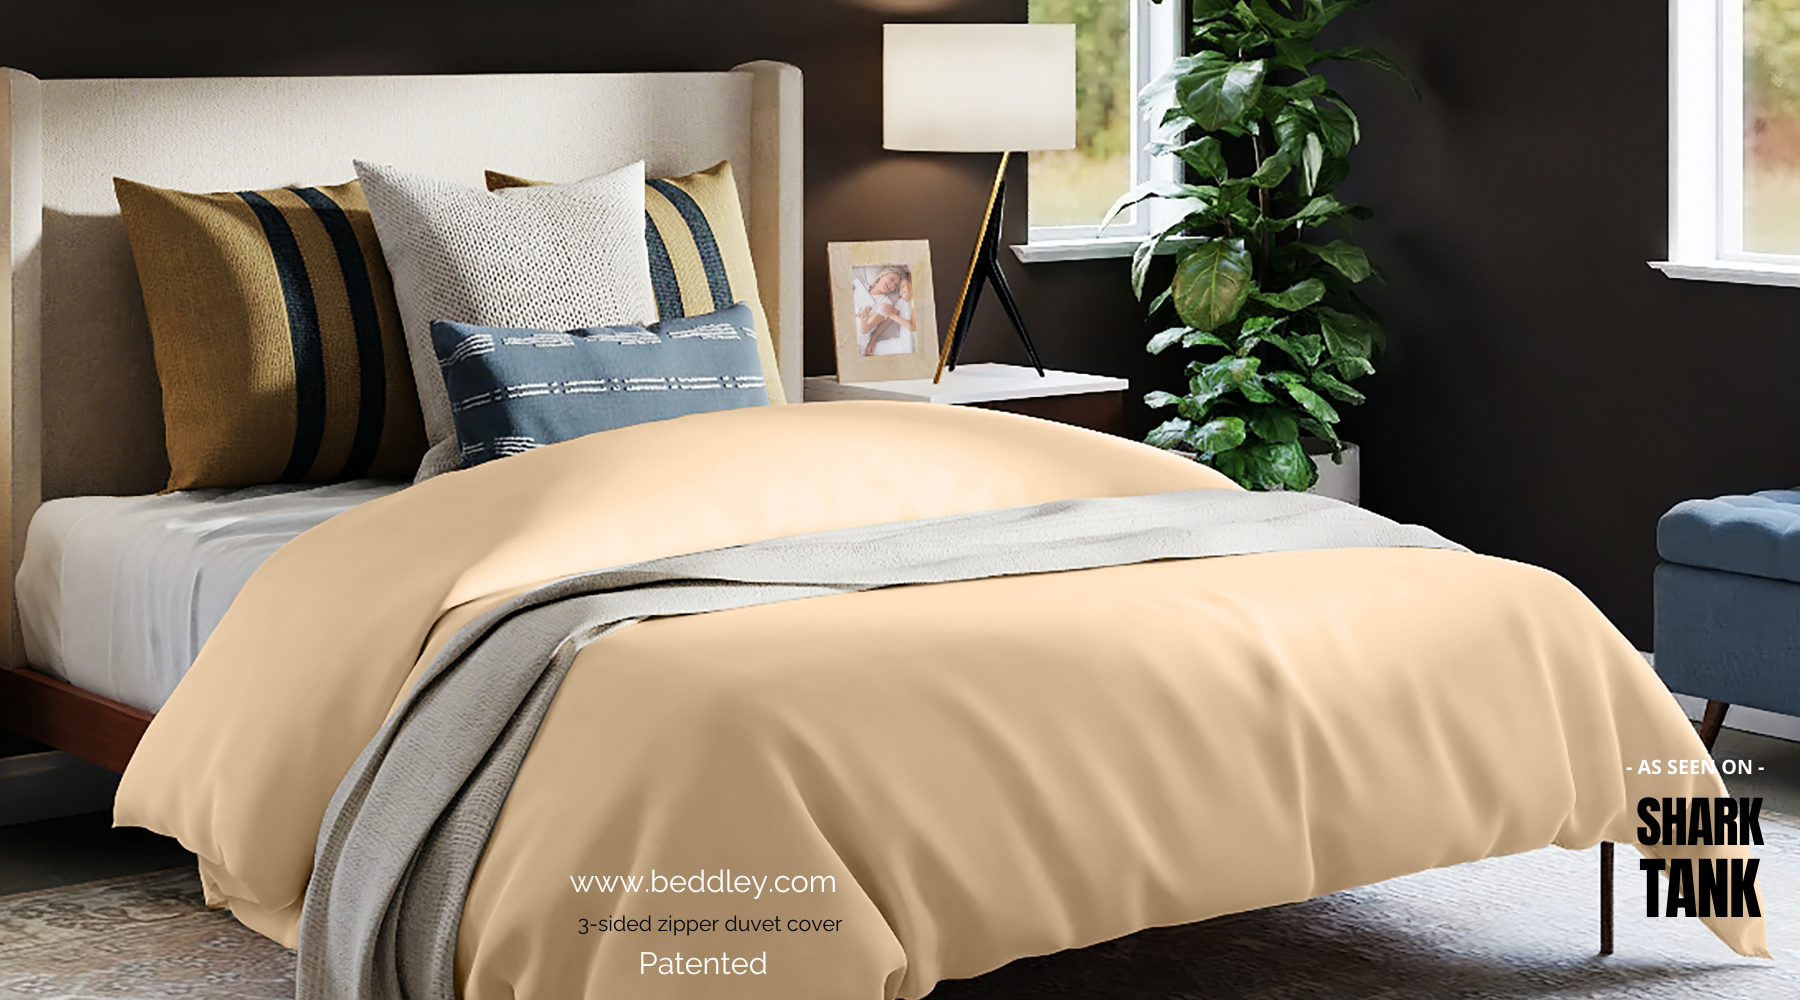 best duvet cover 3-sided-zipper champagne color. Made by Beddley, As Seen On Shark tank.